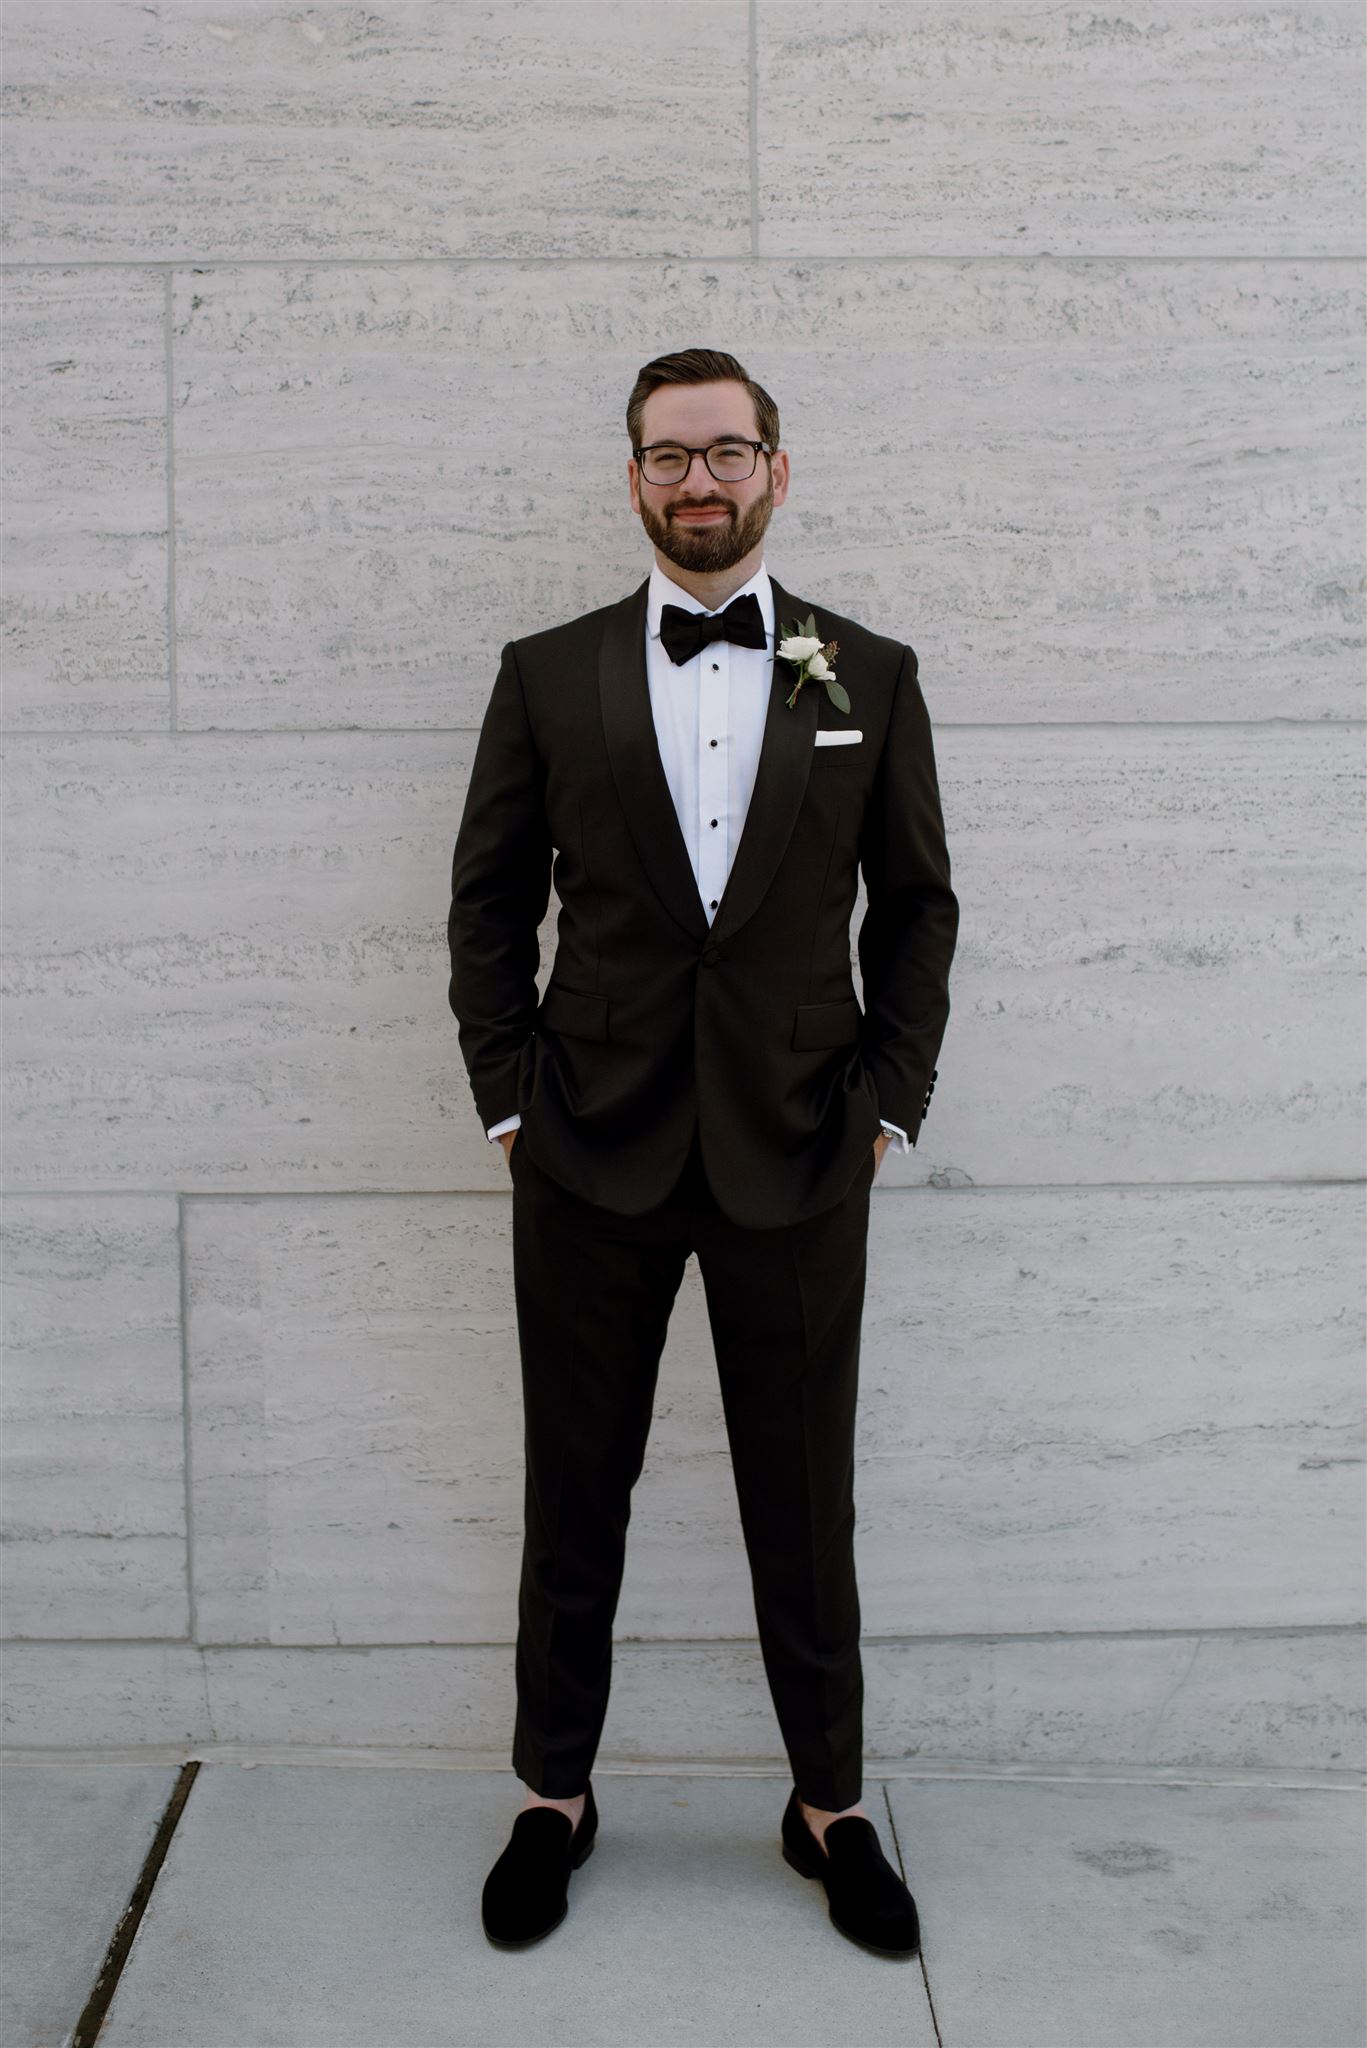 A great example of formal groom attire.